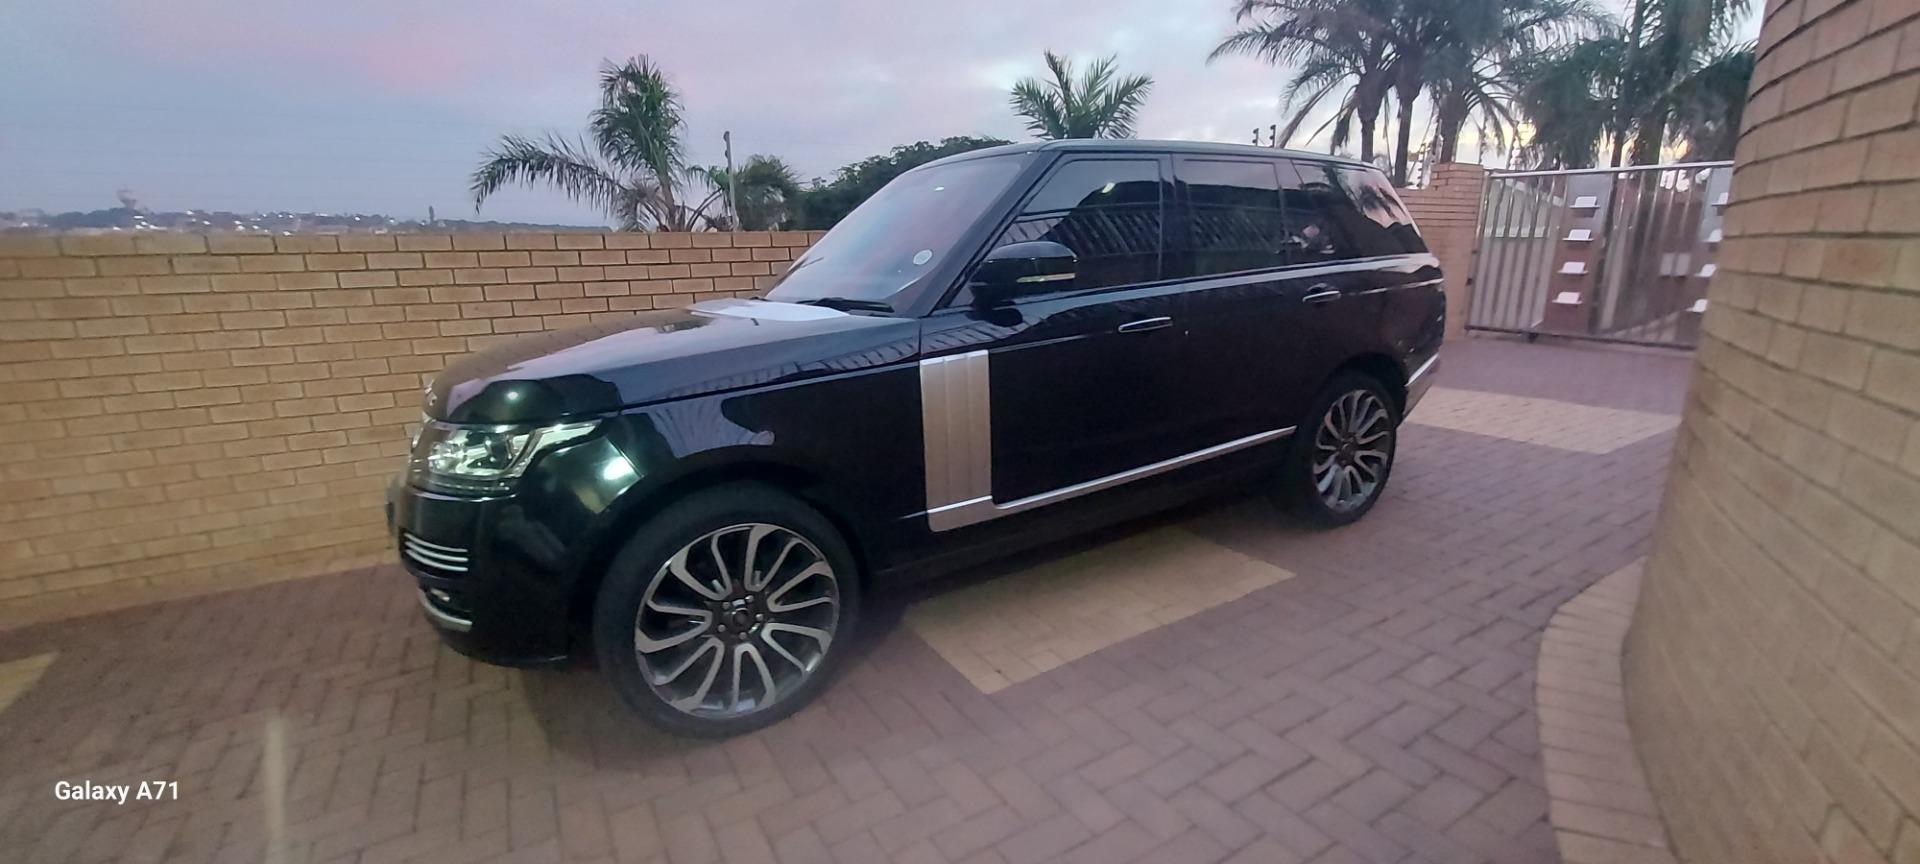 2014 Land Rover Range Rover Autobiography SDV8 For Sale